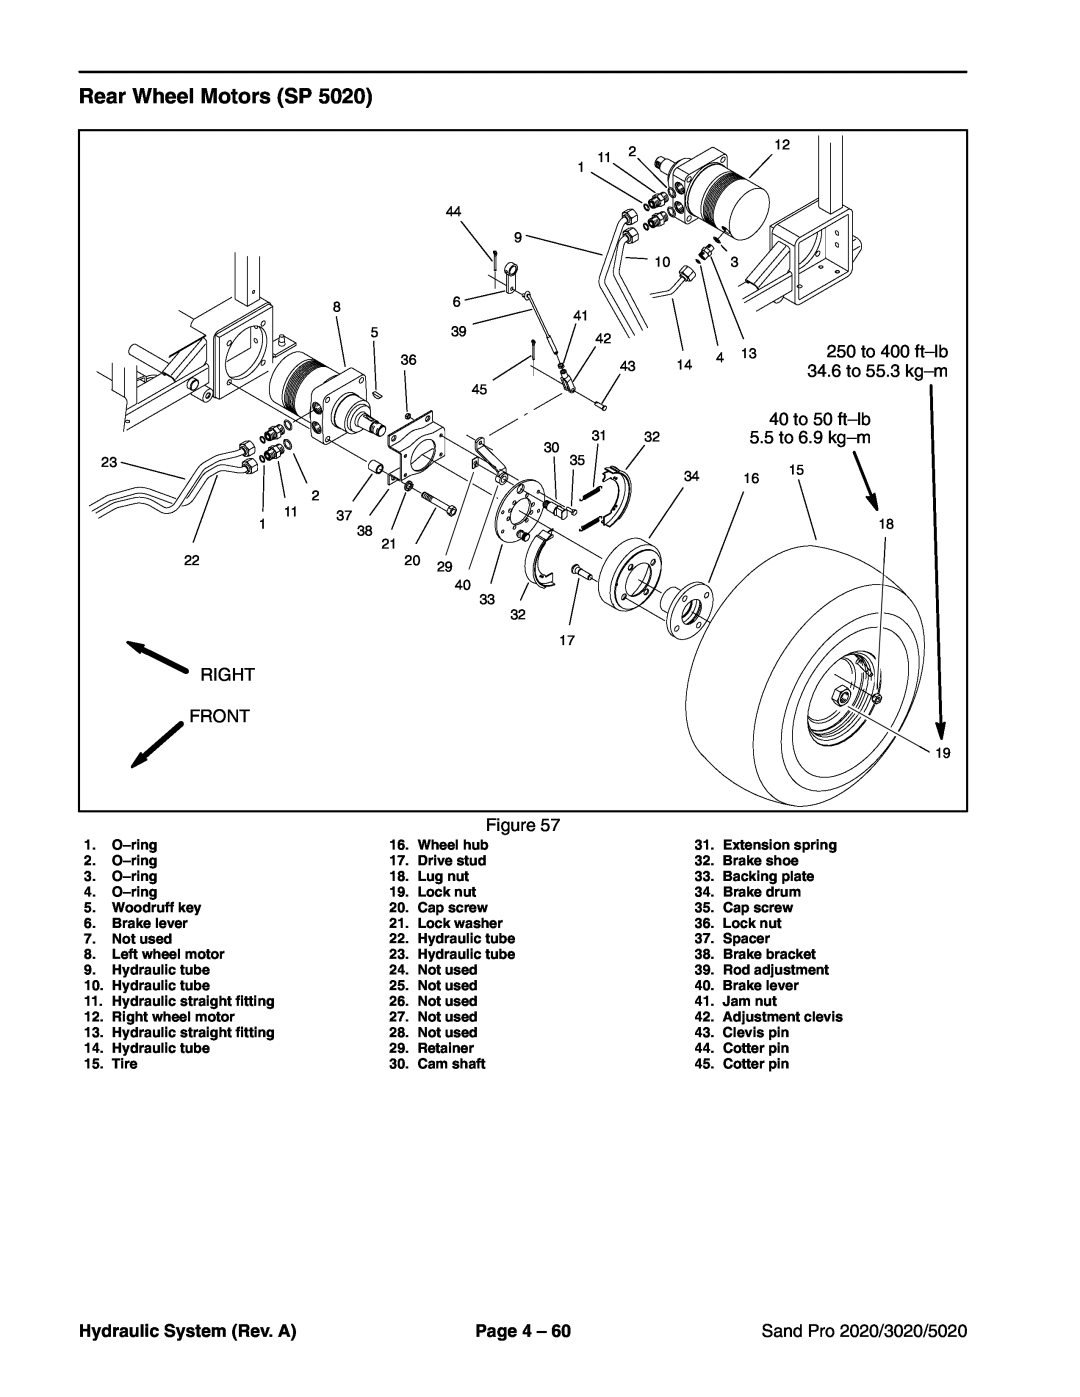 Toro service manual Rear Wheel Motors SP, Hydraulic System Rev. A, Page 4, Sand Pro 2020/3020/5020, Extension spring 